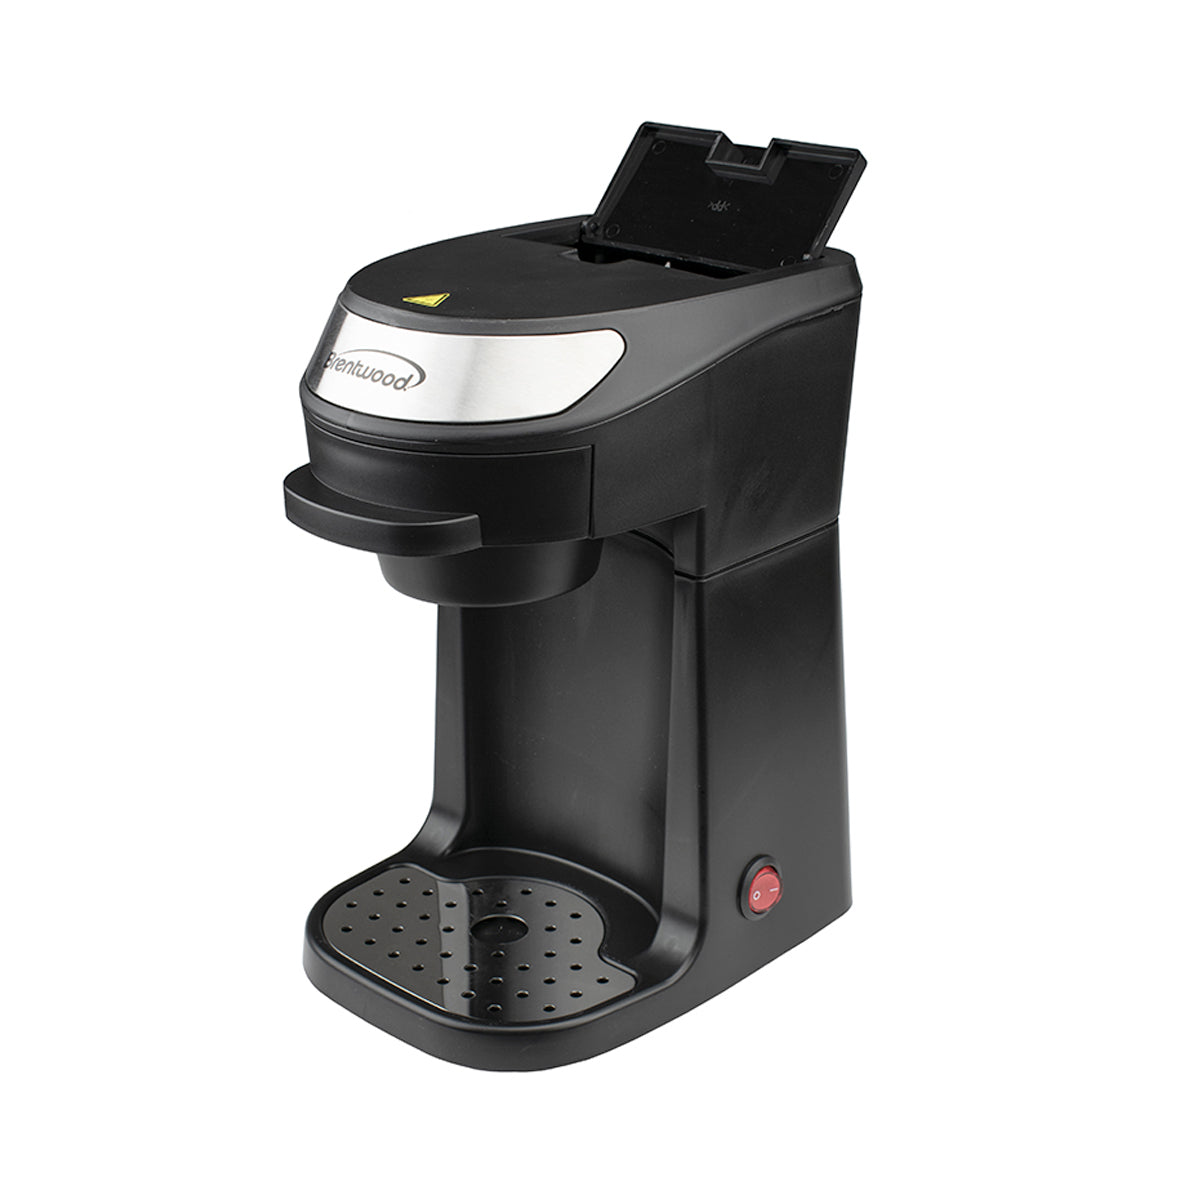 Coffee Maker 1 Taza  Brentwood